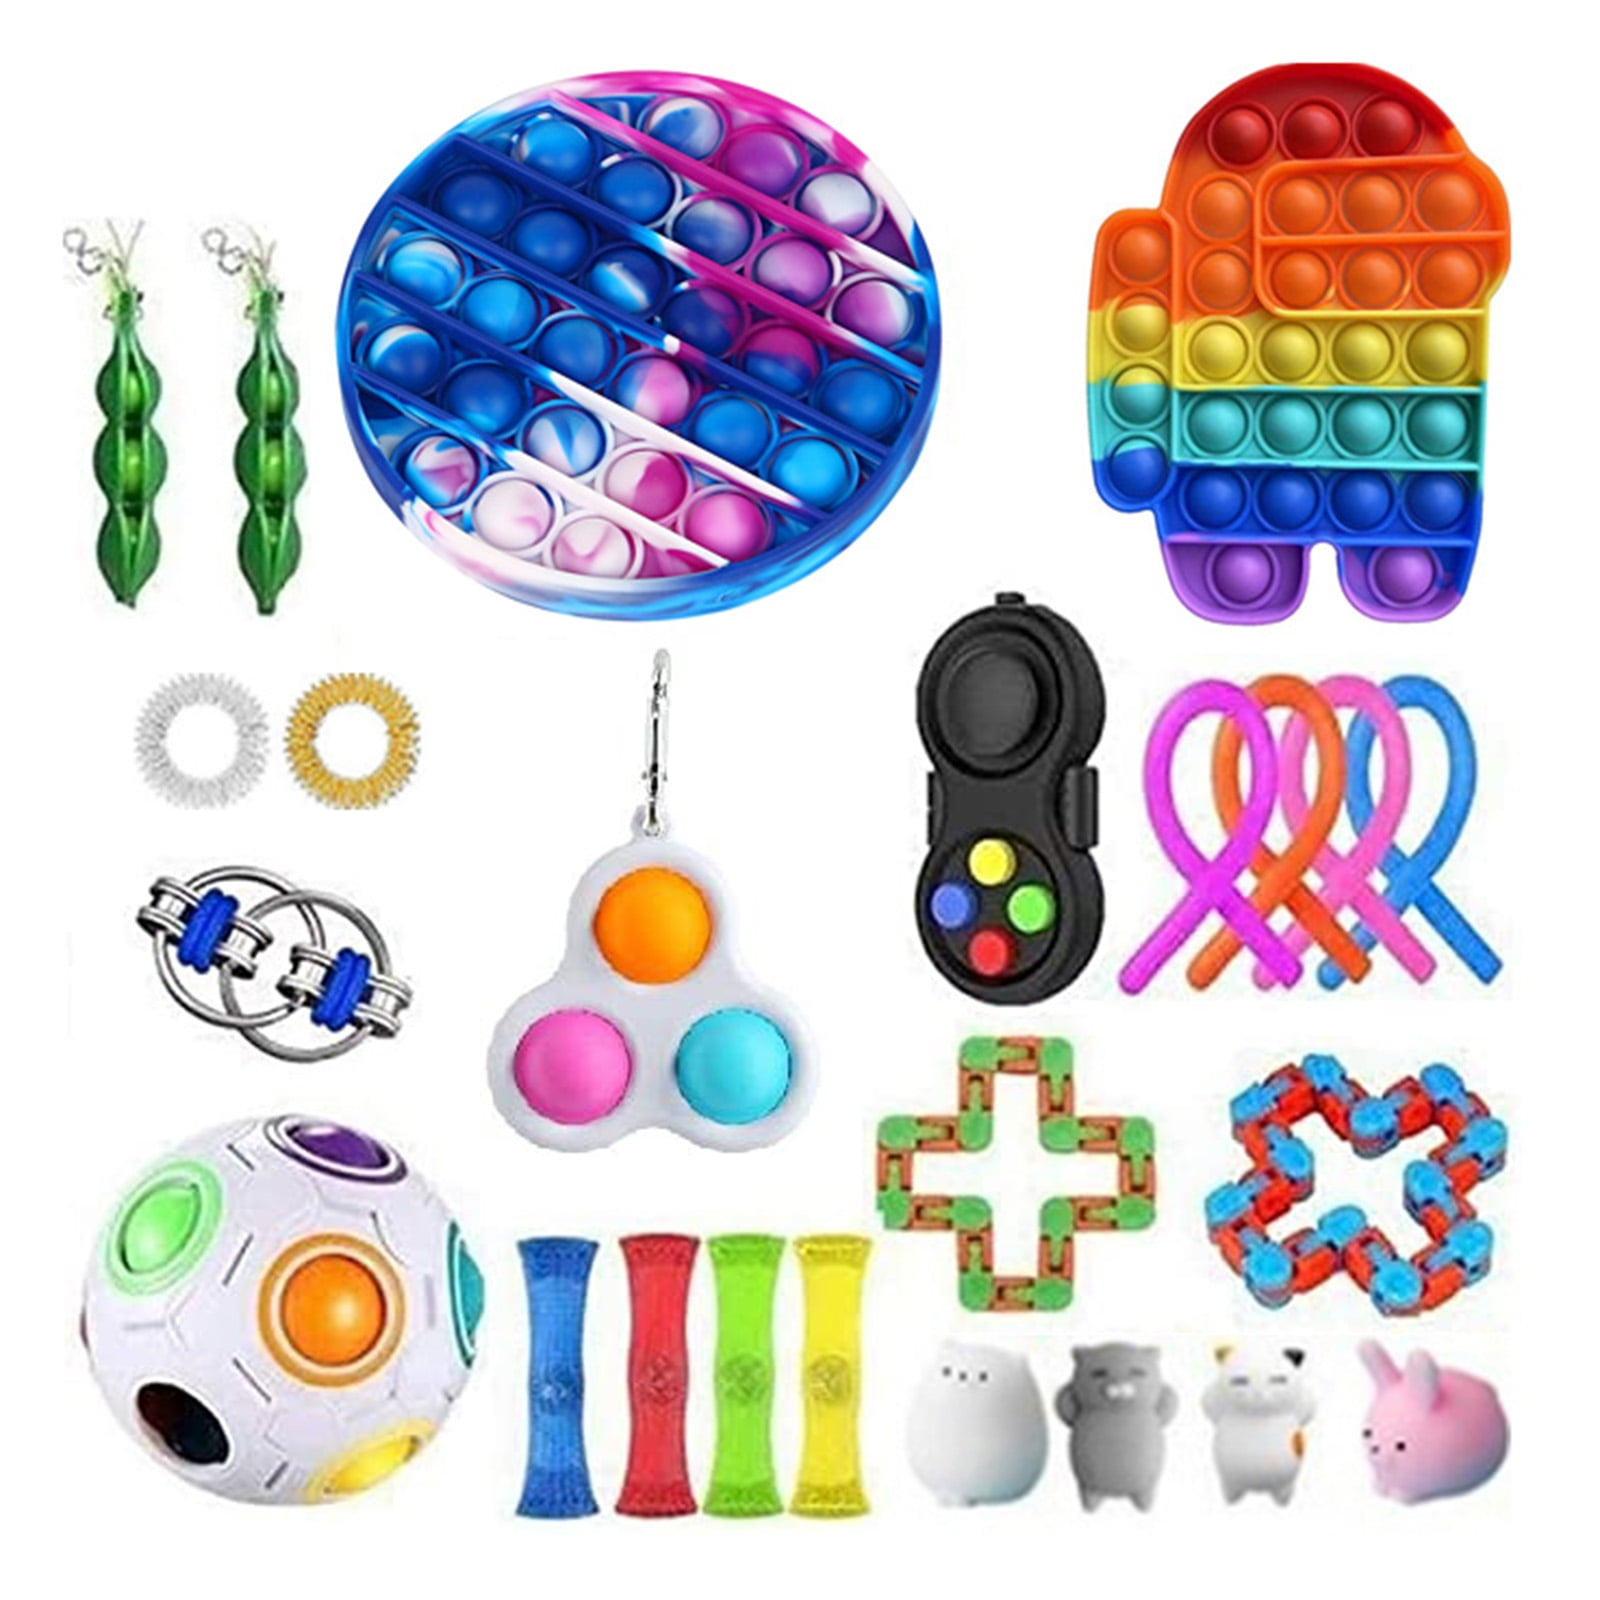 Details about   Fidget Toy Anti-Stress Marble Mesh Fidget Tube Anxiety Stress Autism Relief 